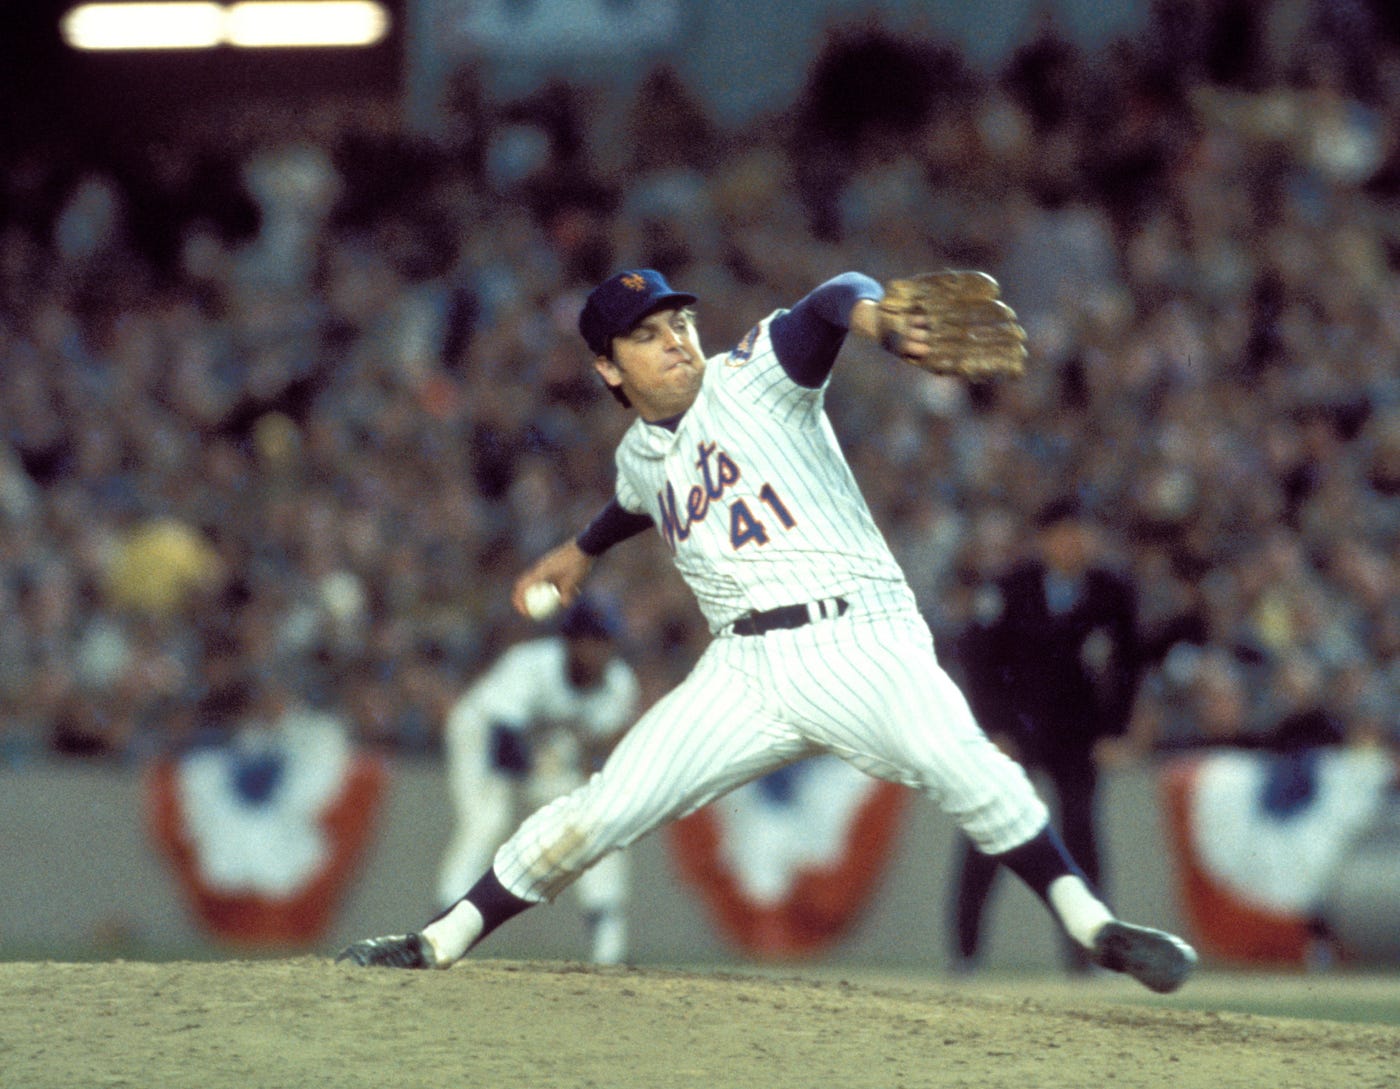 Tom Seaver's statue to be unveiled at Mets' home opener on April